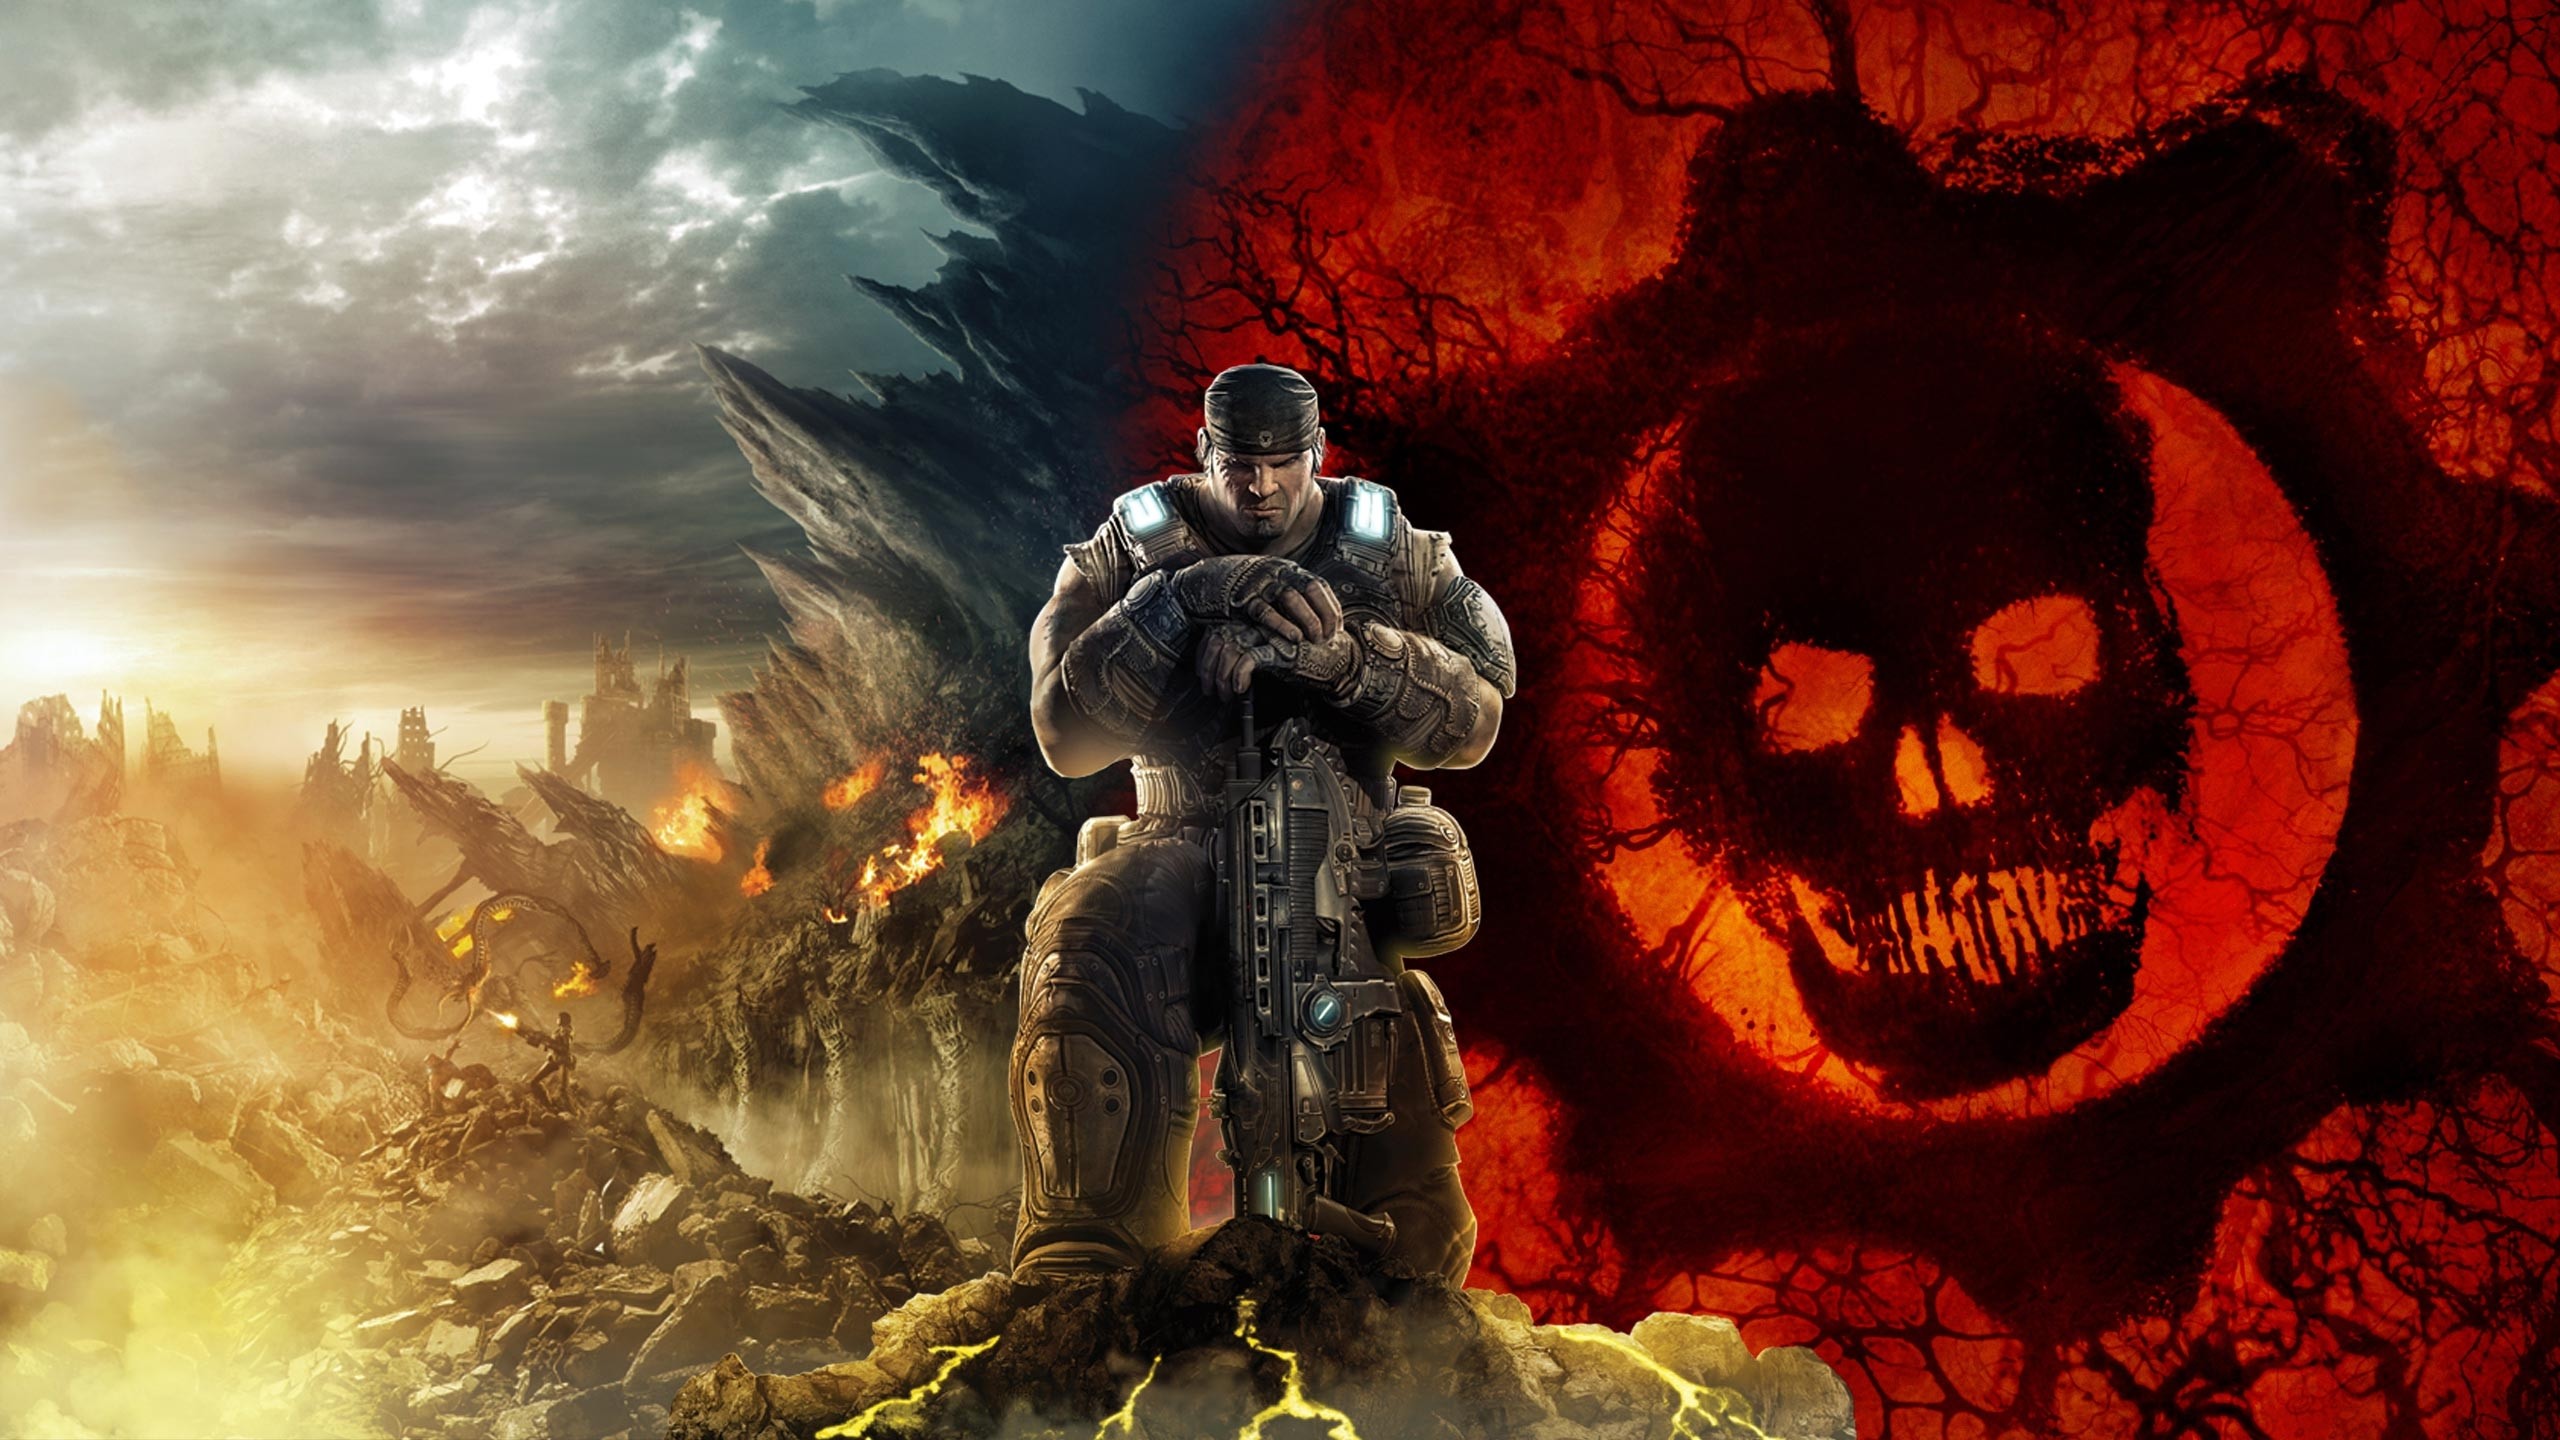 2560x1440 Wallpaper Gears of war, Skull, Soldier, Sky, Mountains, Marcus fenix HD,  Picture, Image